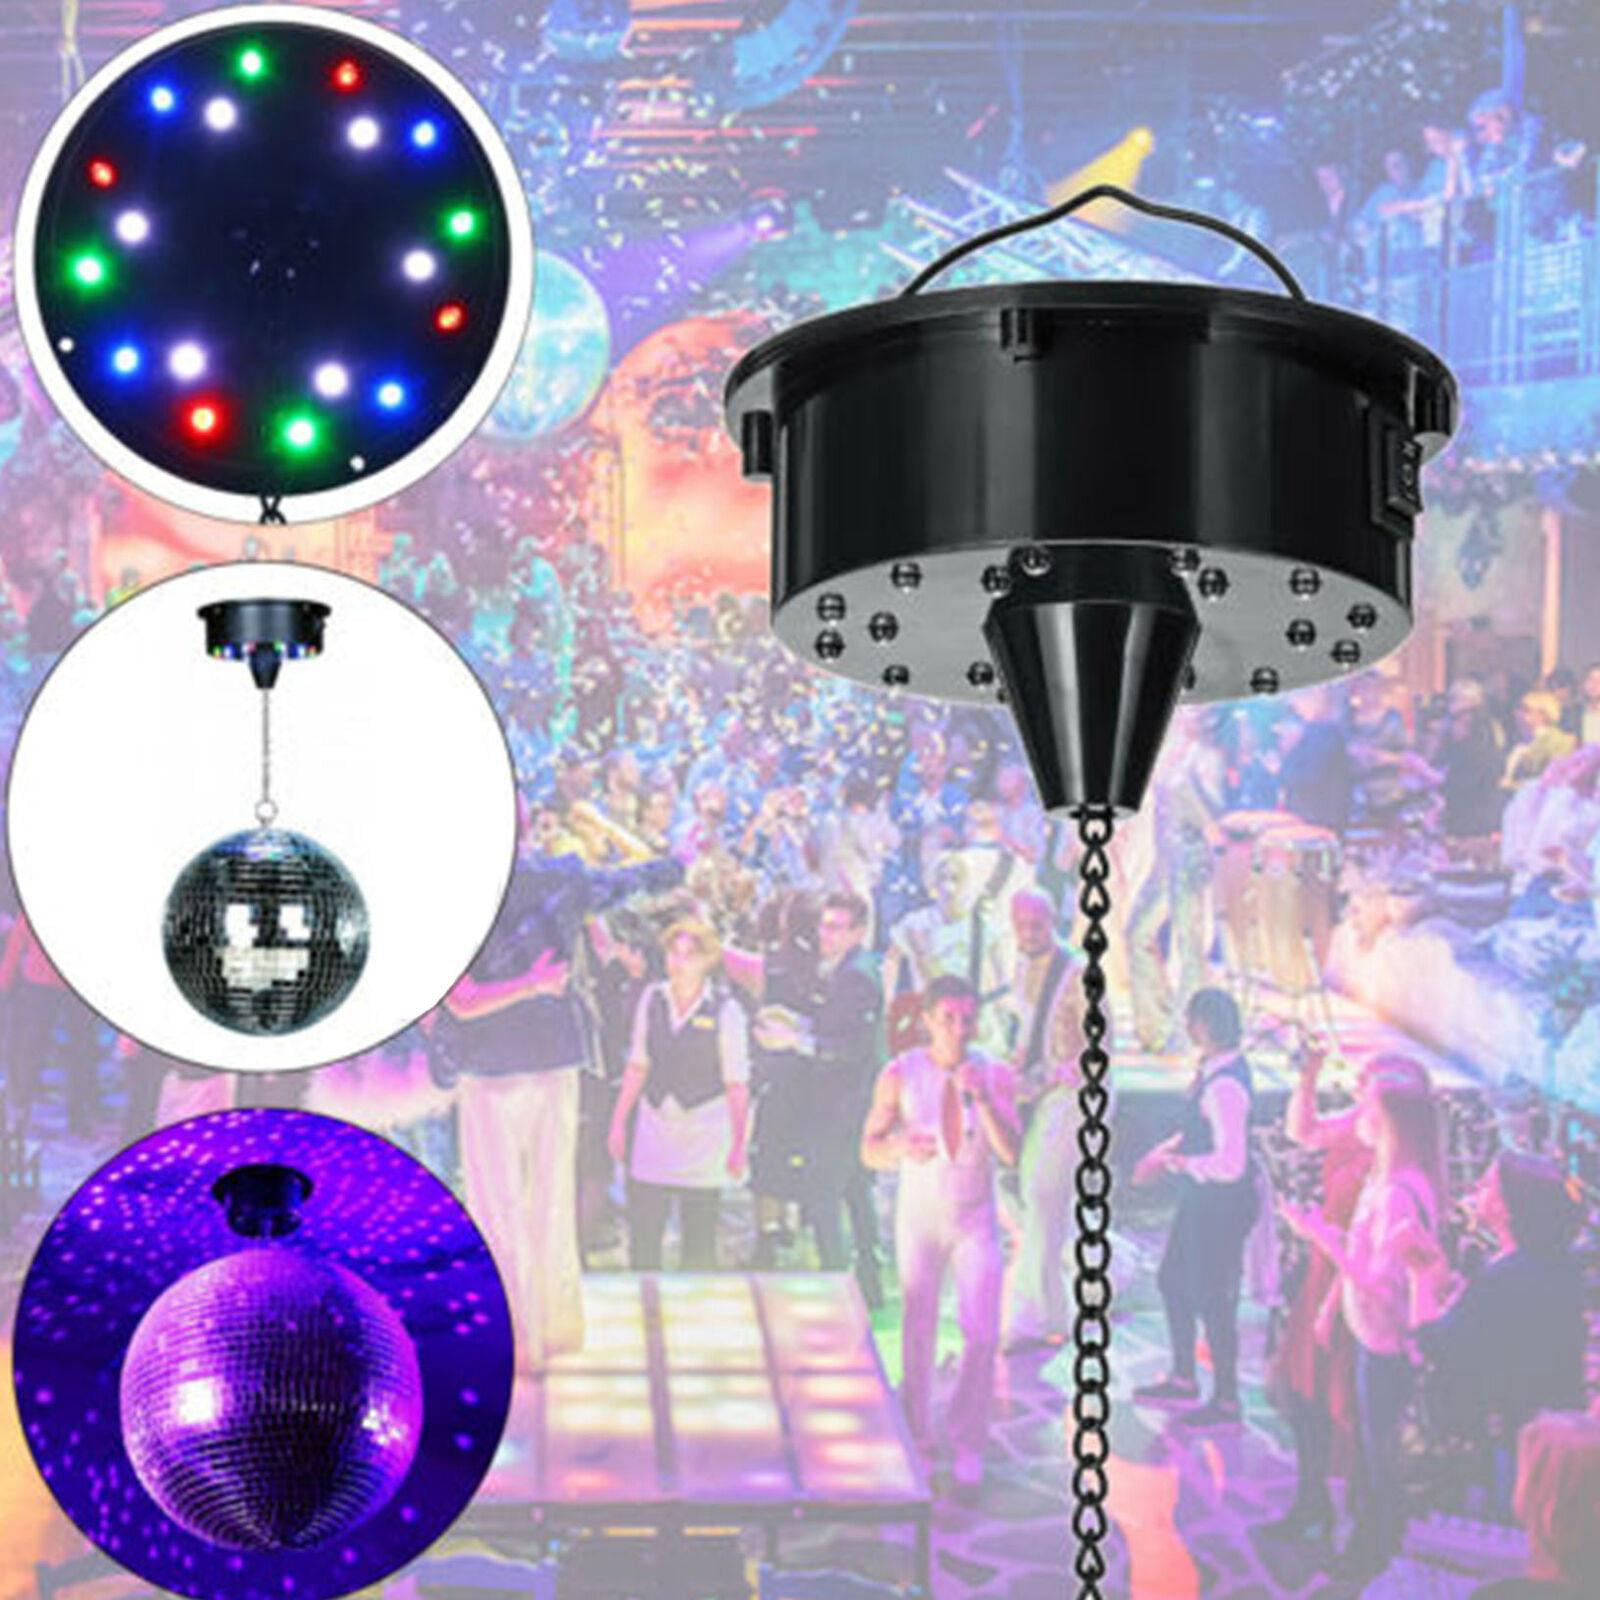 Mirror Reflection Hanging Ball for Disco DJ Party Stage Light Disco Ball Sound Control Motor Motor B T TOOYFUL 18 LED Lights Rotating Glass Mirror 